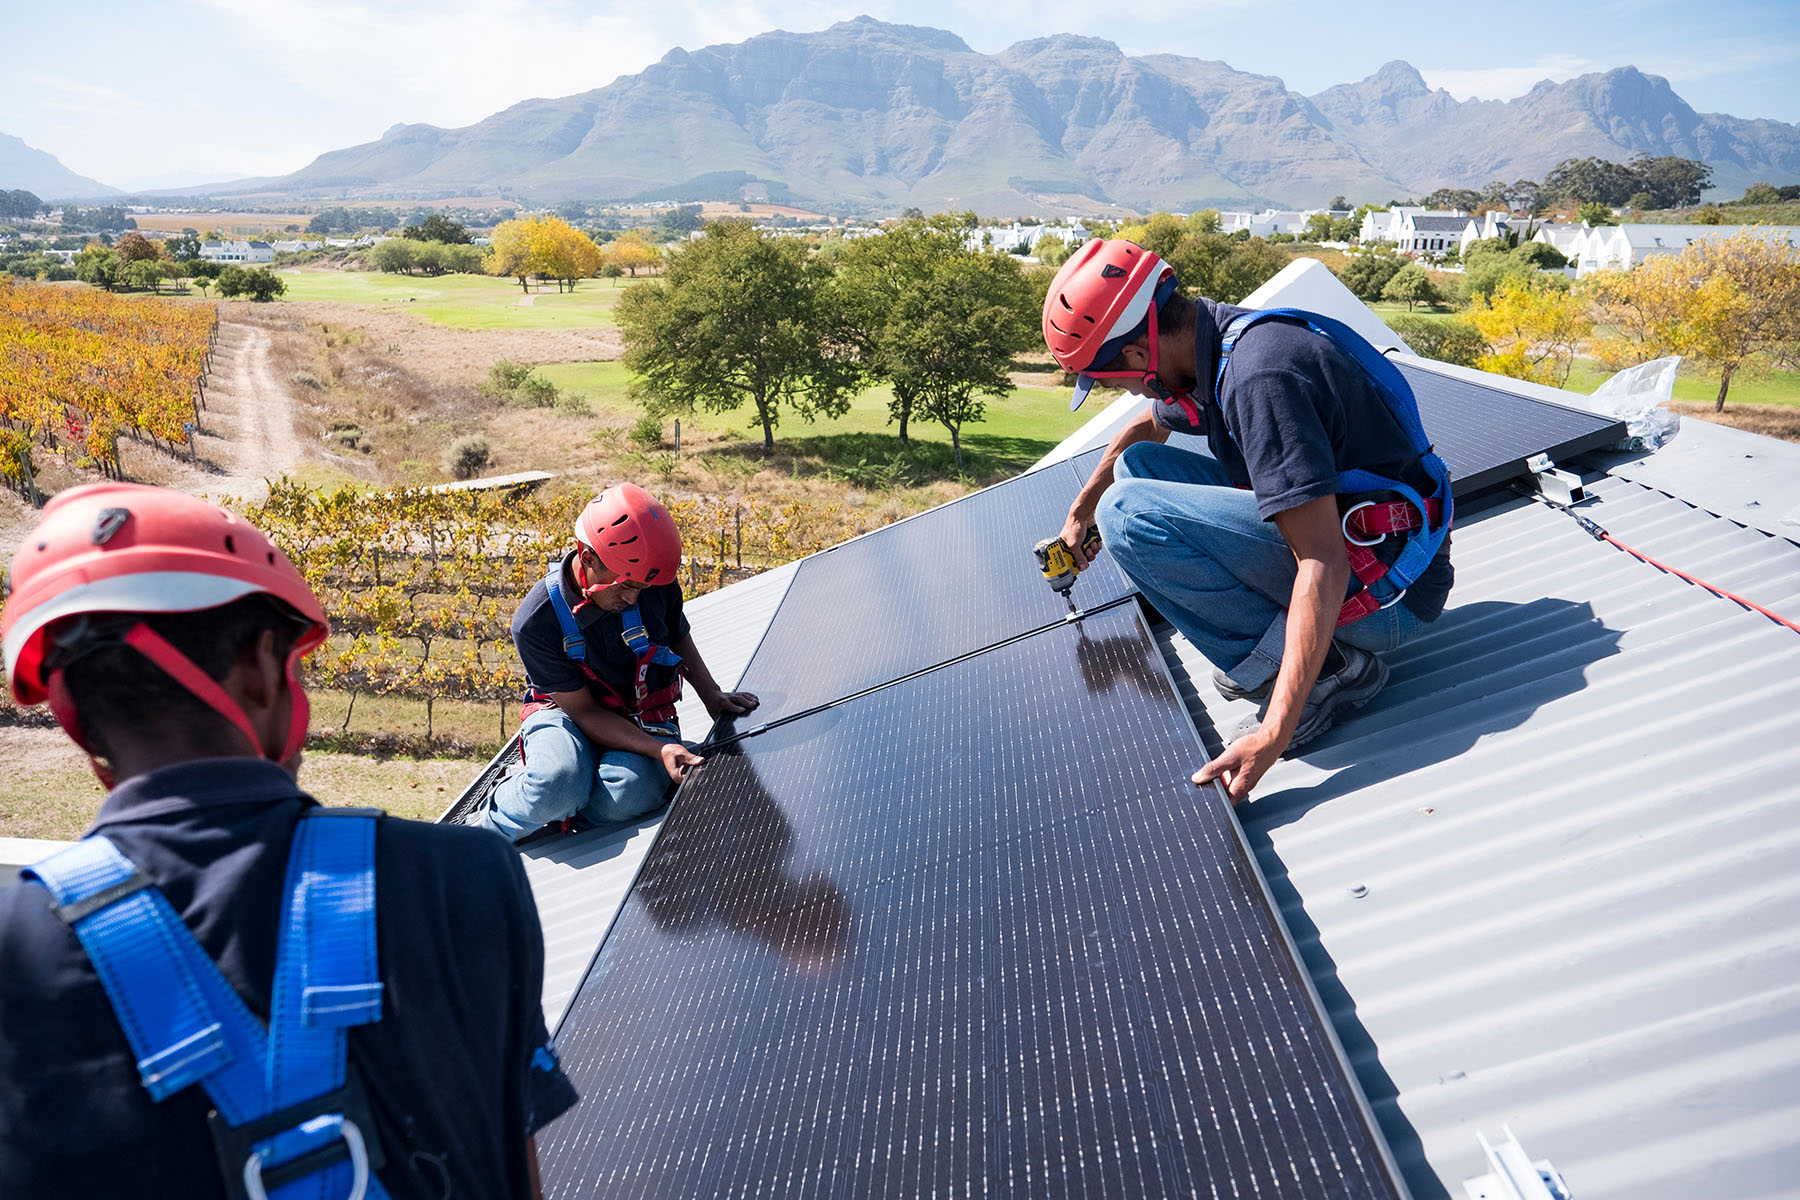 Technicians install solar panels on a roof of a home in South Africa